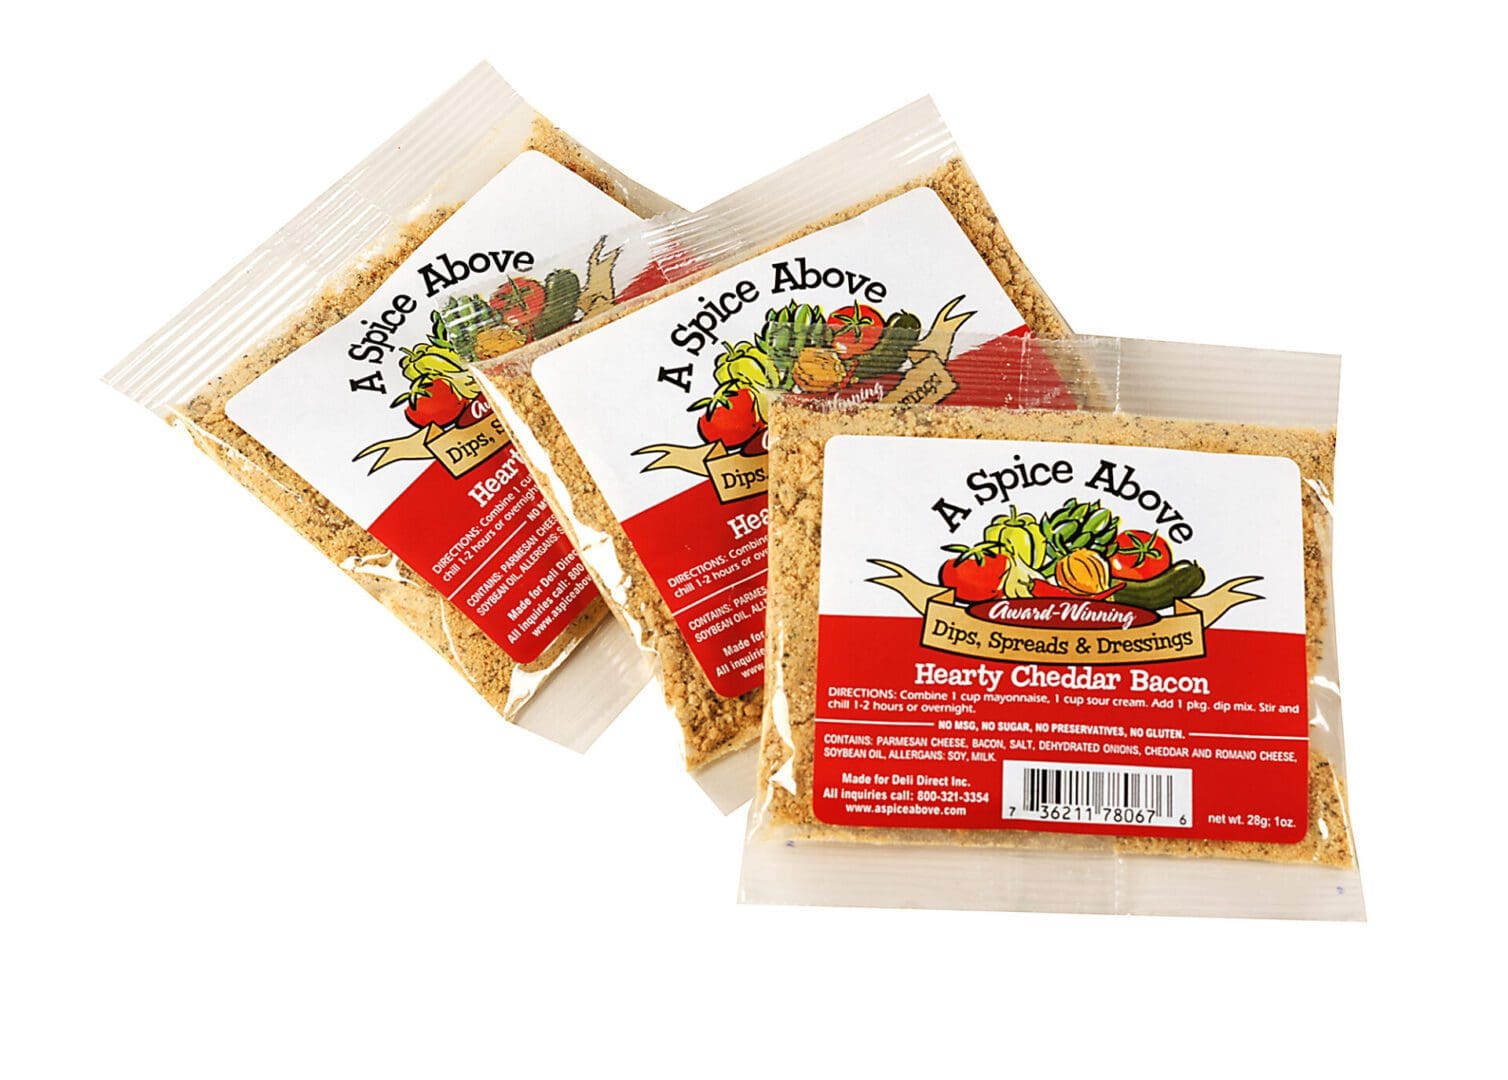 Three packages of a spice above 's savory chicken marinade.